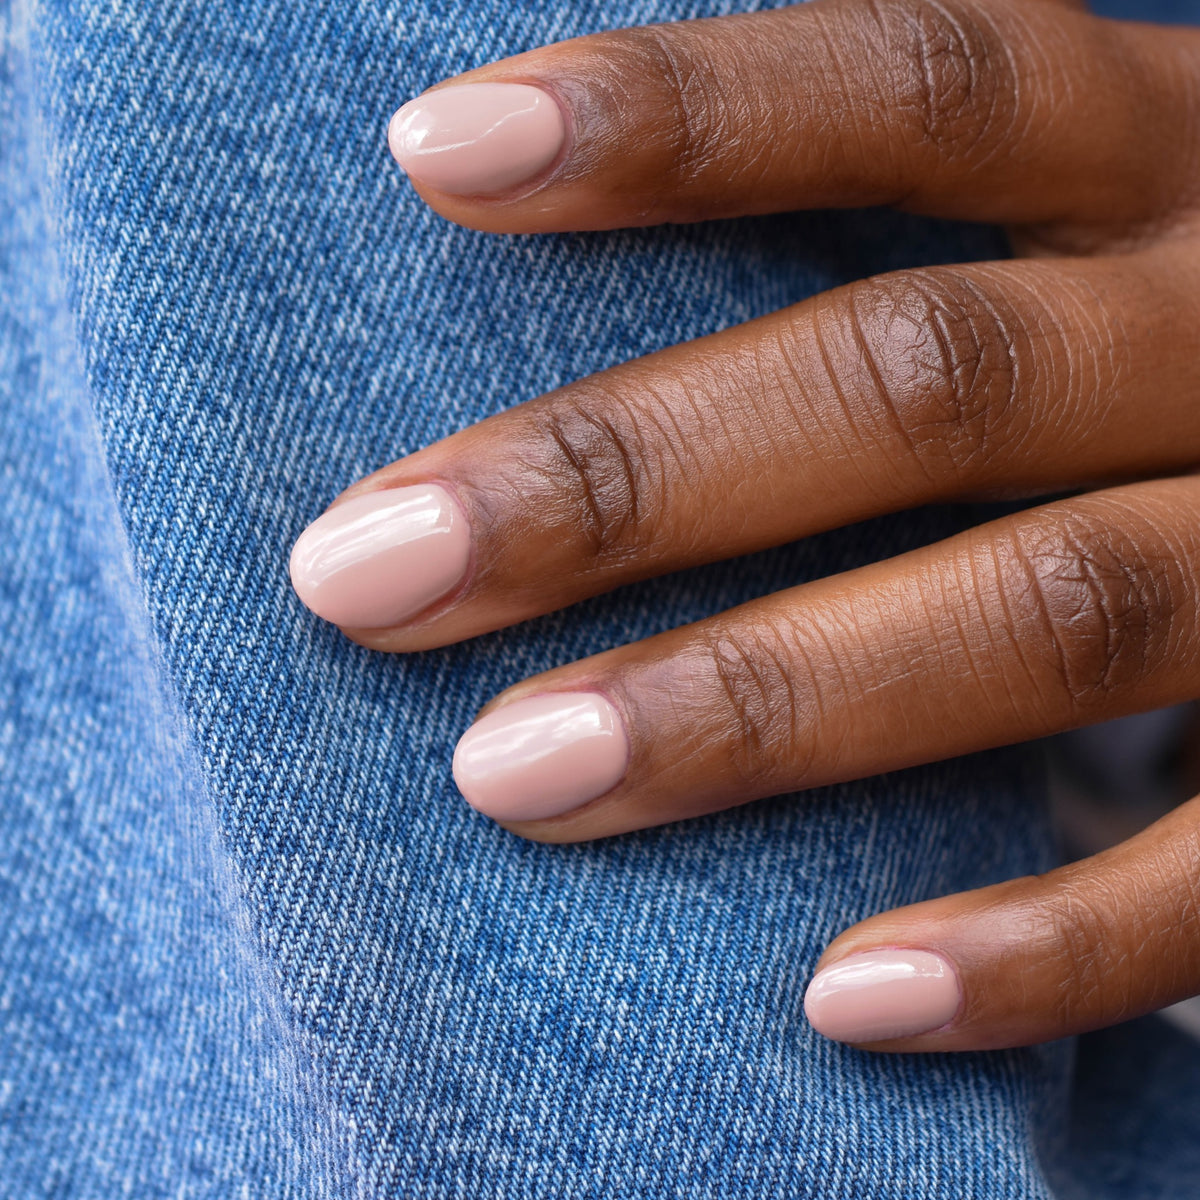 A close up of a model's hand showing fingers touching denim. It's goin' Down nail polish is painted on her nails  which is a light tan taupe hue and the skin tone is deep.